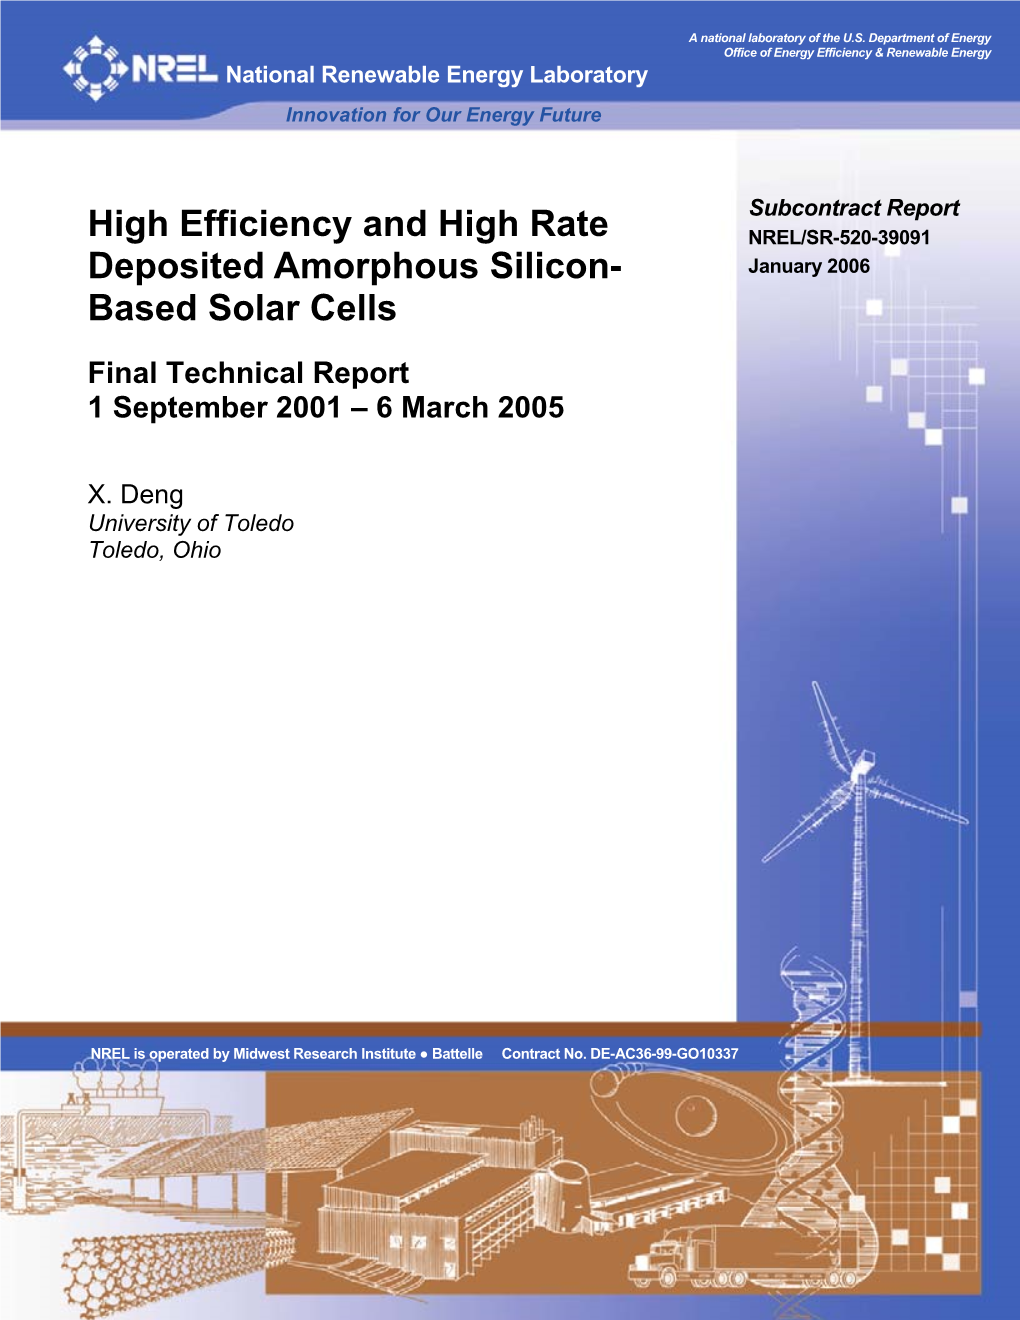 High Efficiency and High Rate Deposited Amorphous Silicon-Based Solar Cells”, NREL Phase I Annual Technical Progress Report (Sept